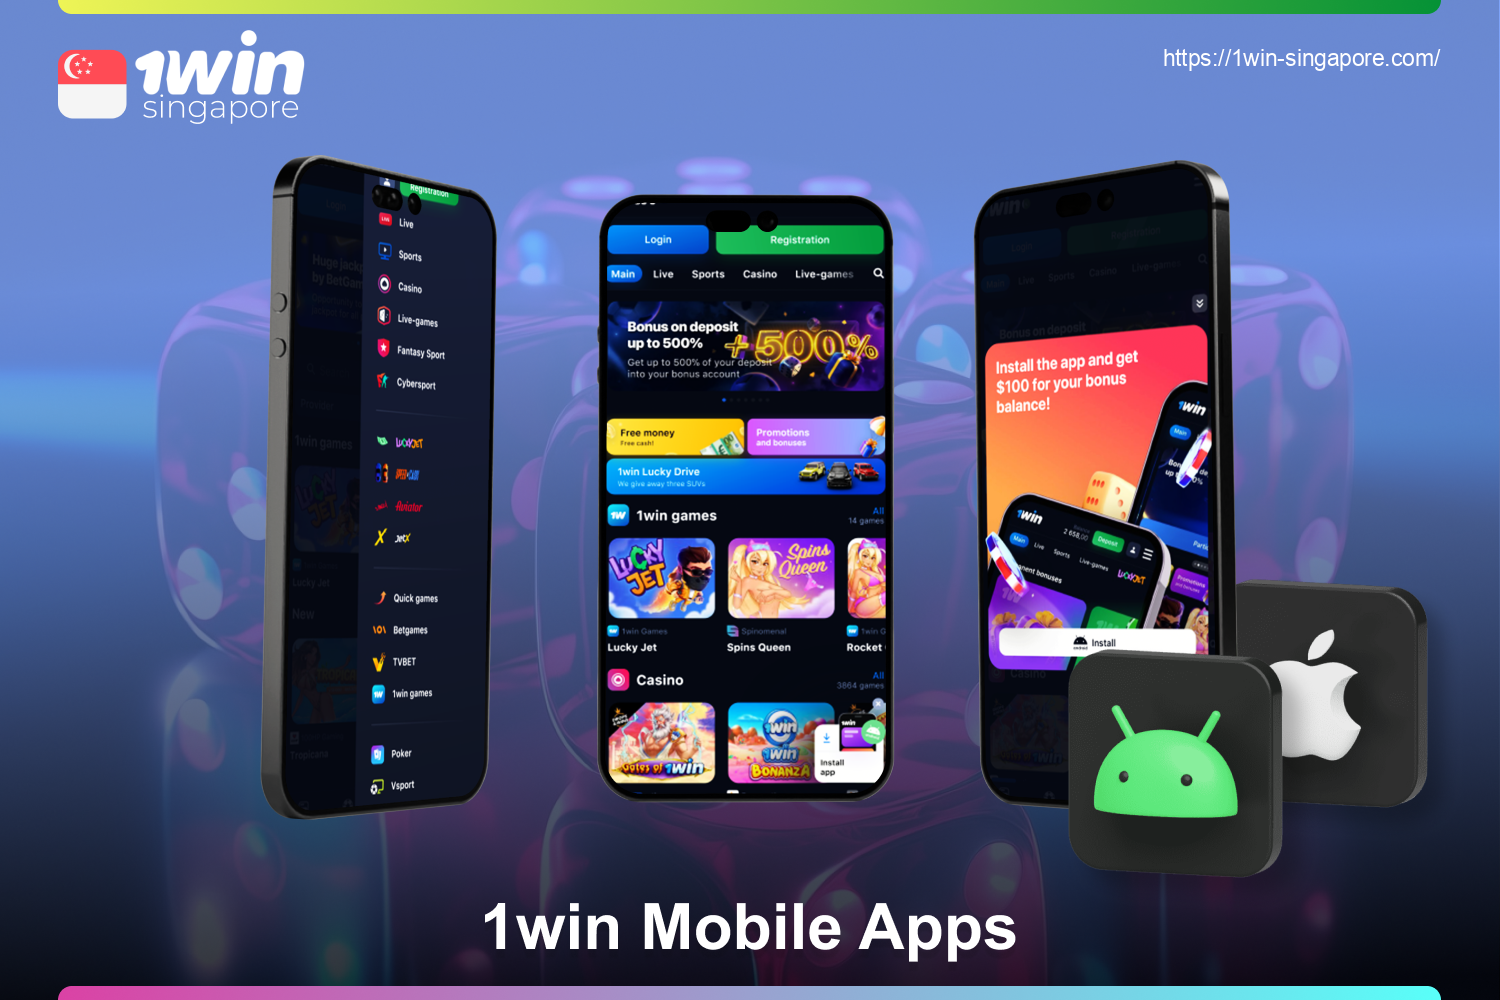 Users in Singapore can download the 1win app for free on their Android or iOS smartphone